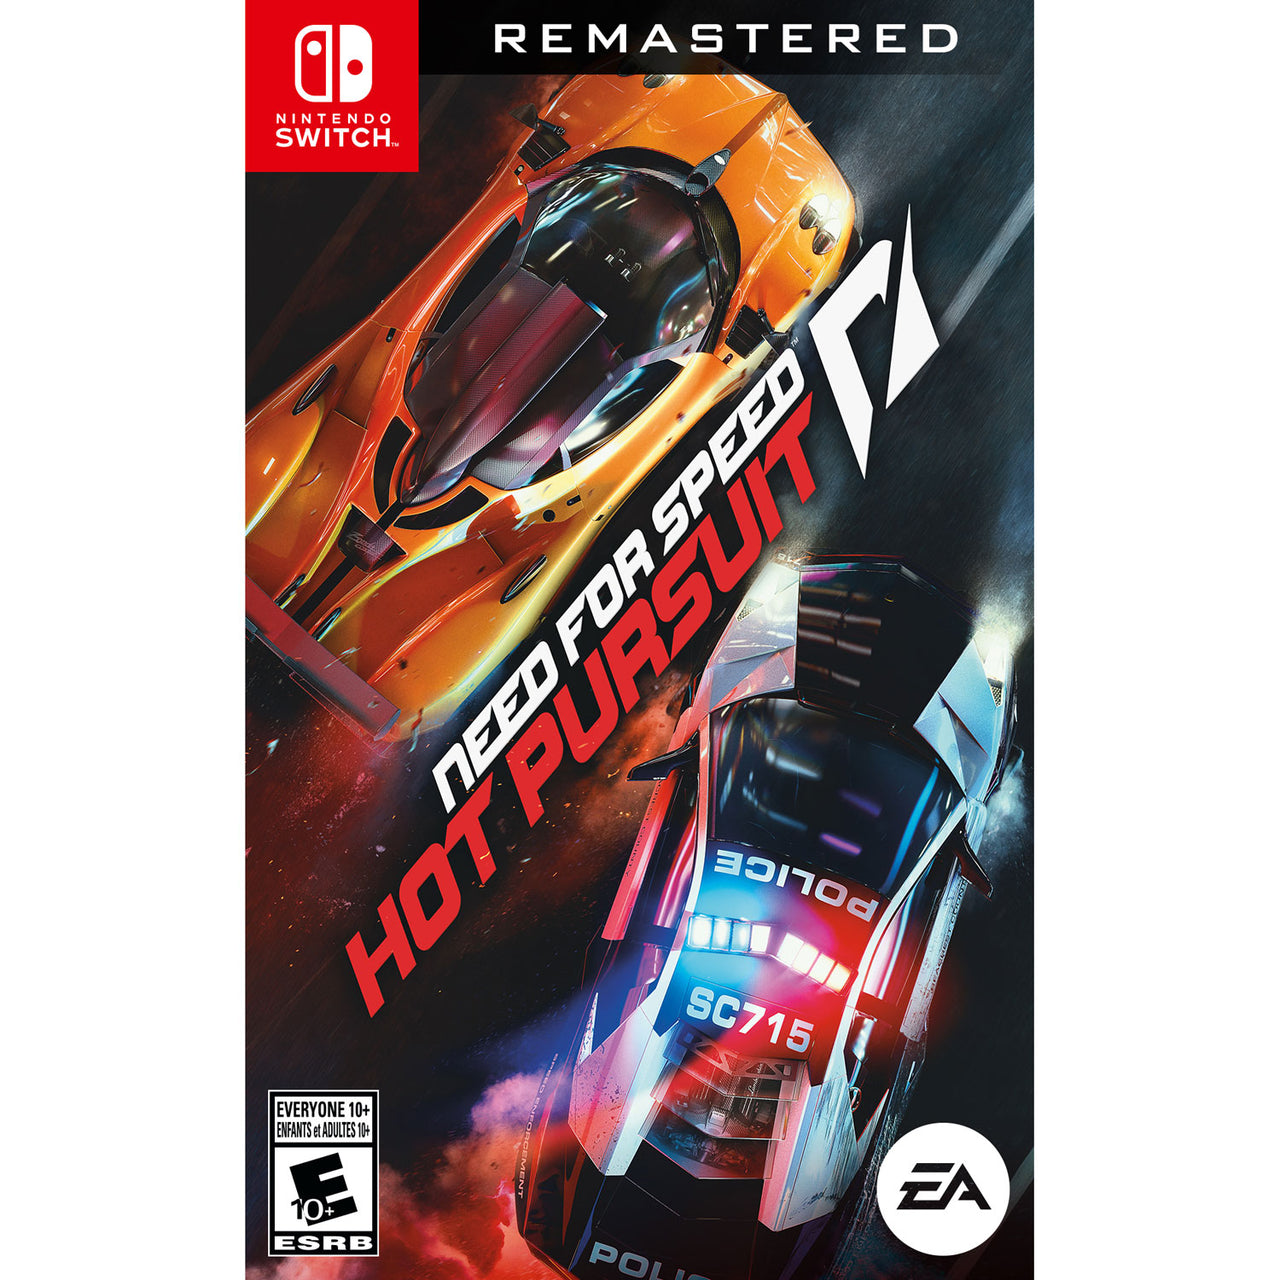 Need for Speed: Hot Pursuit Remastered (Switch)